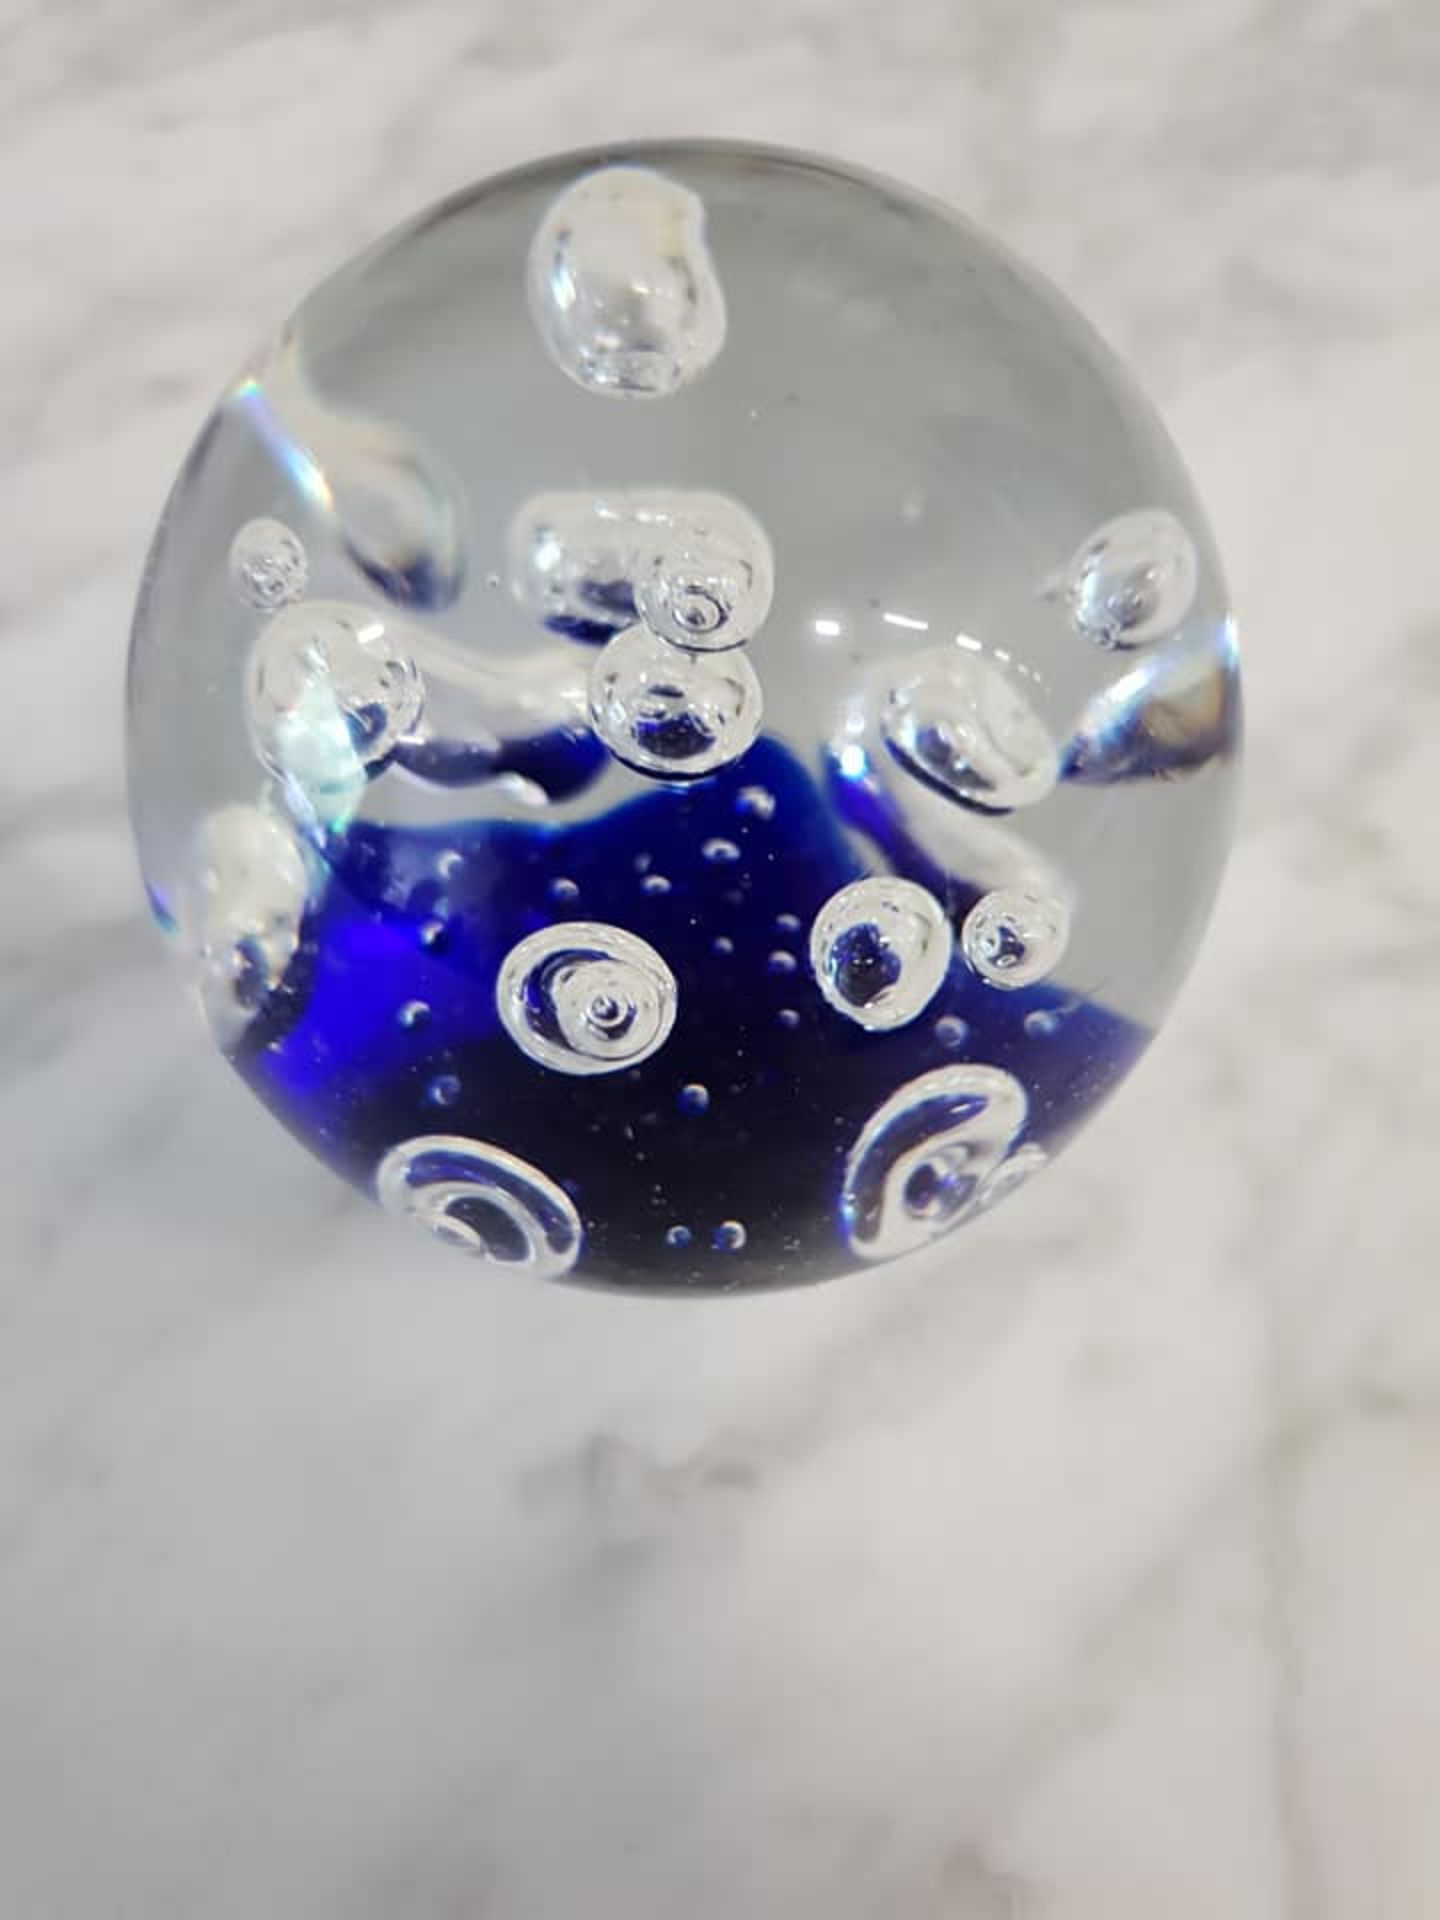 Bohemian blown art glass sphere paperweight 10cm dark navy blue middle with controlled bubbles